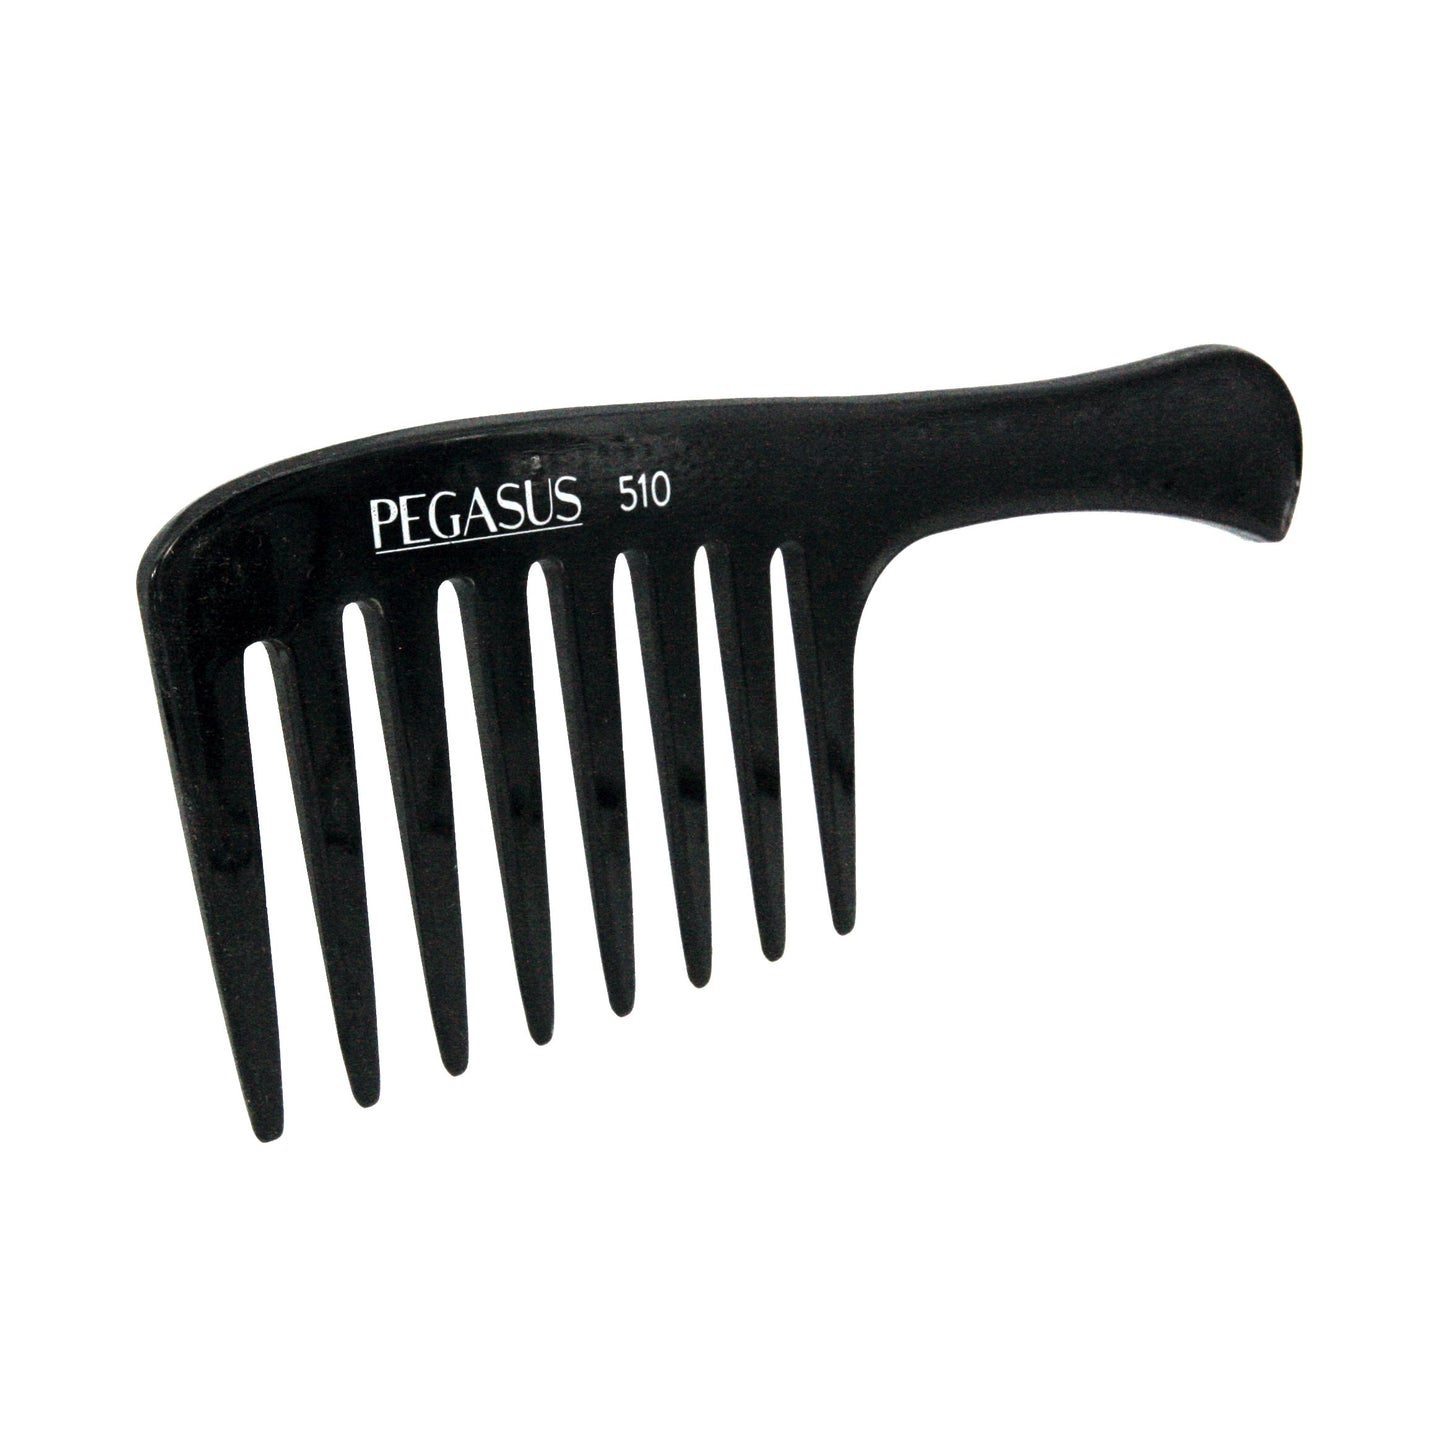 Pegasus 510, 9in Hard Rubber Large Detangling Handled Styling Rake Comb, Seamless, Smooth Edges, Anti Static, Heat and Chemically Resistant, Everyday Grooming Comb | Peines de goma dura - Black